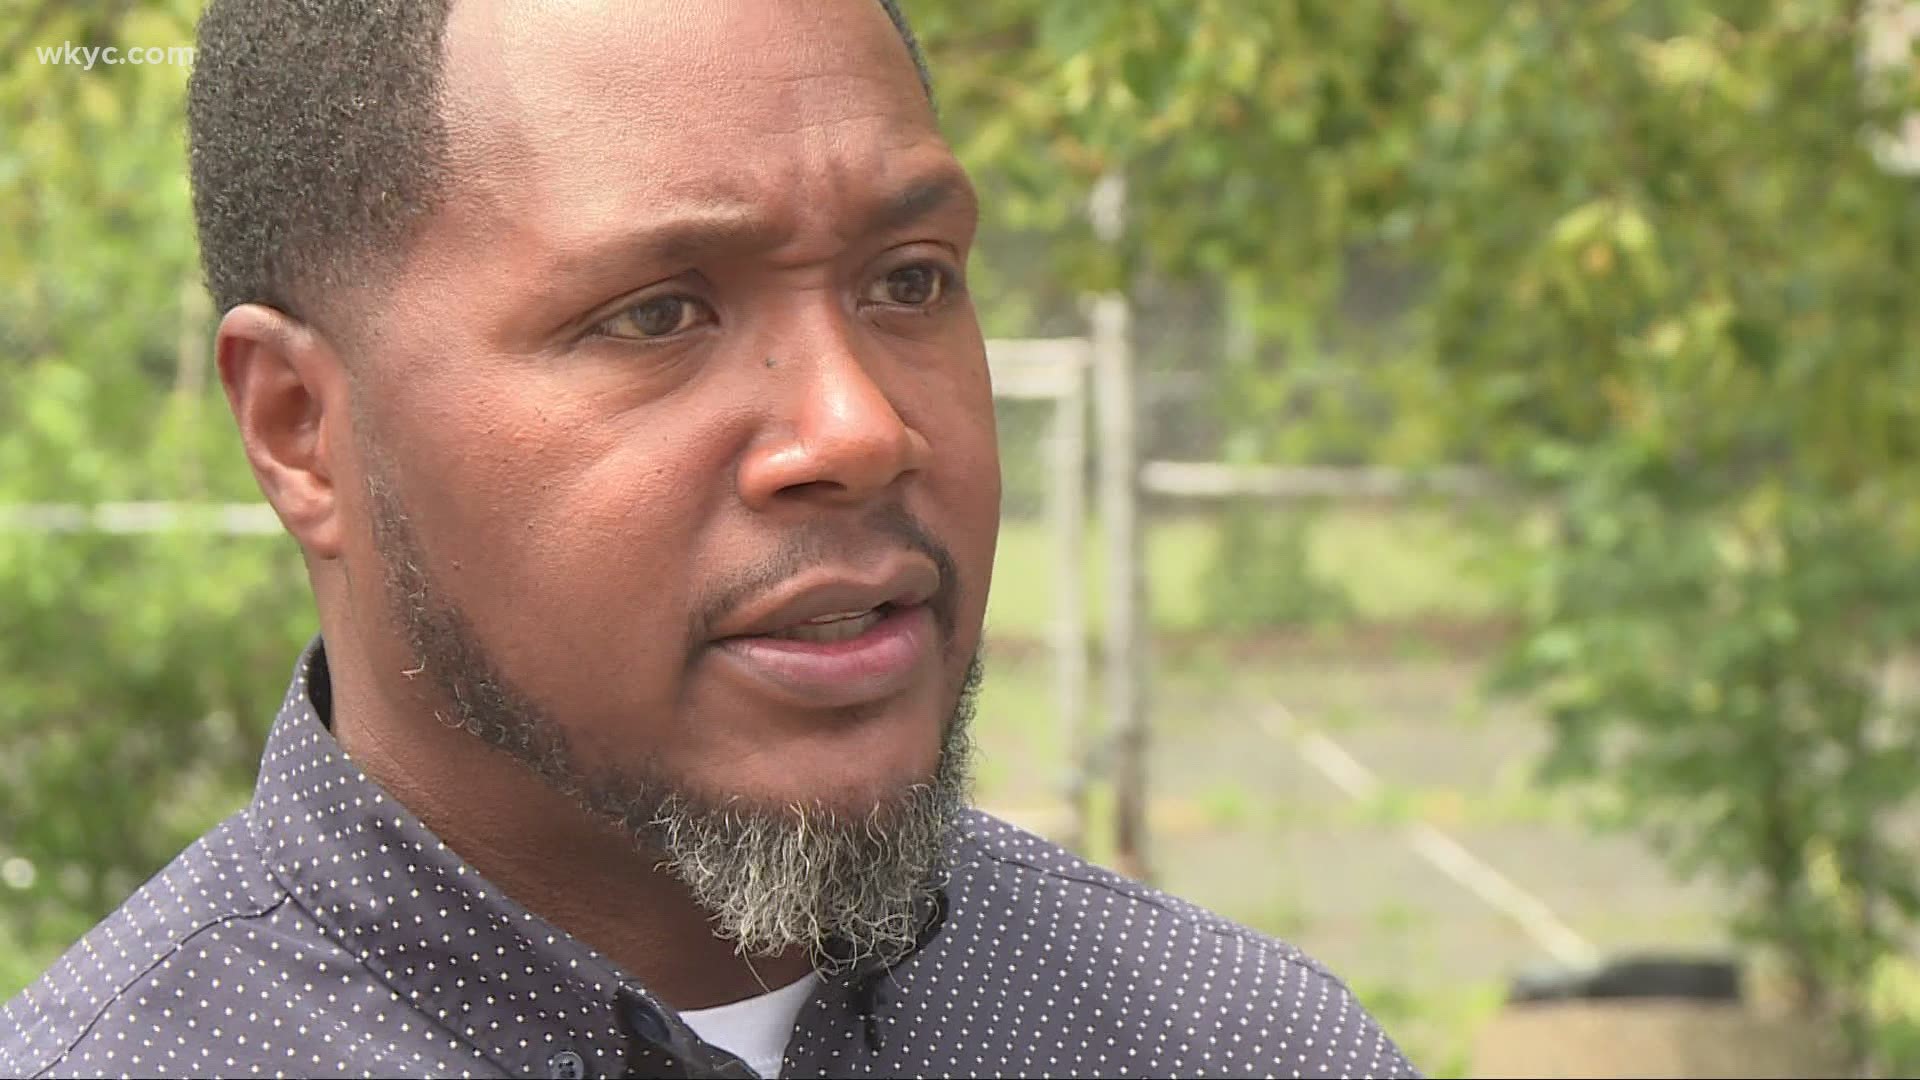 Shaw High school's marching band director says he was forced to resign, after he says new leaders were brought in and began targeting him.